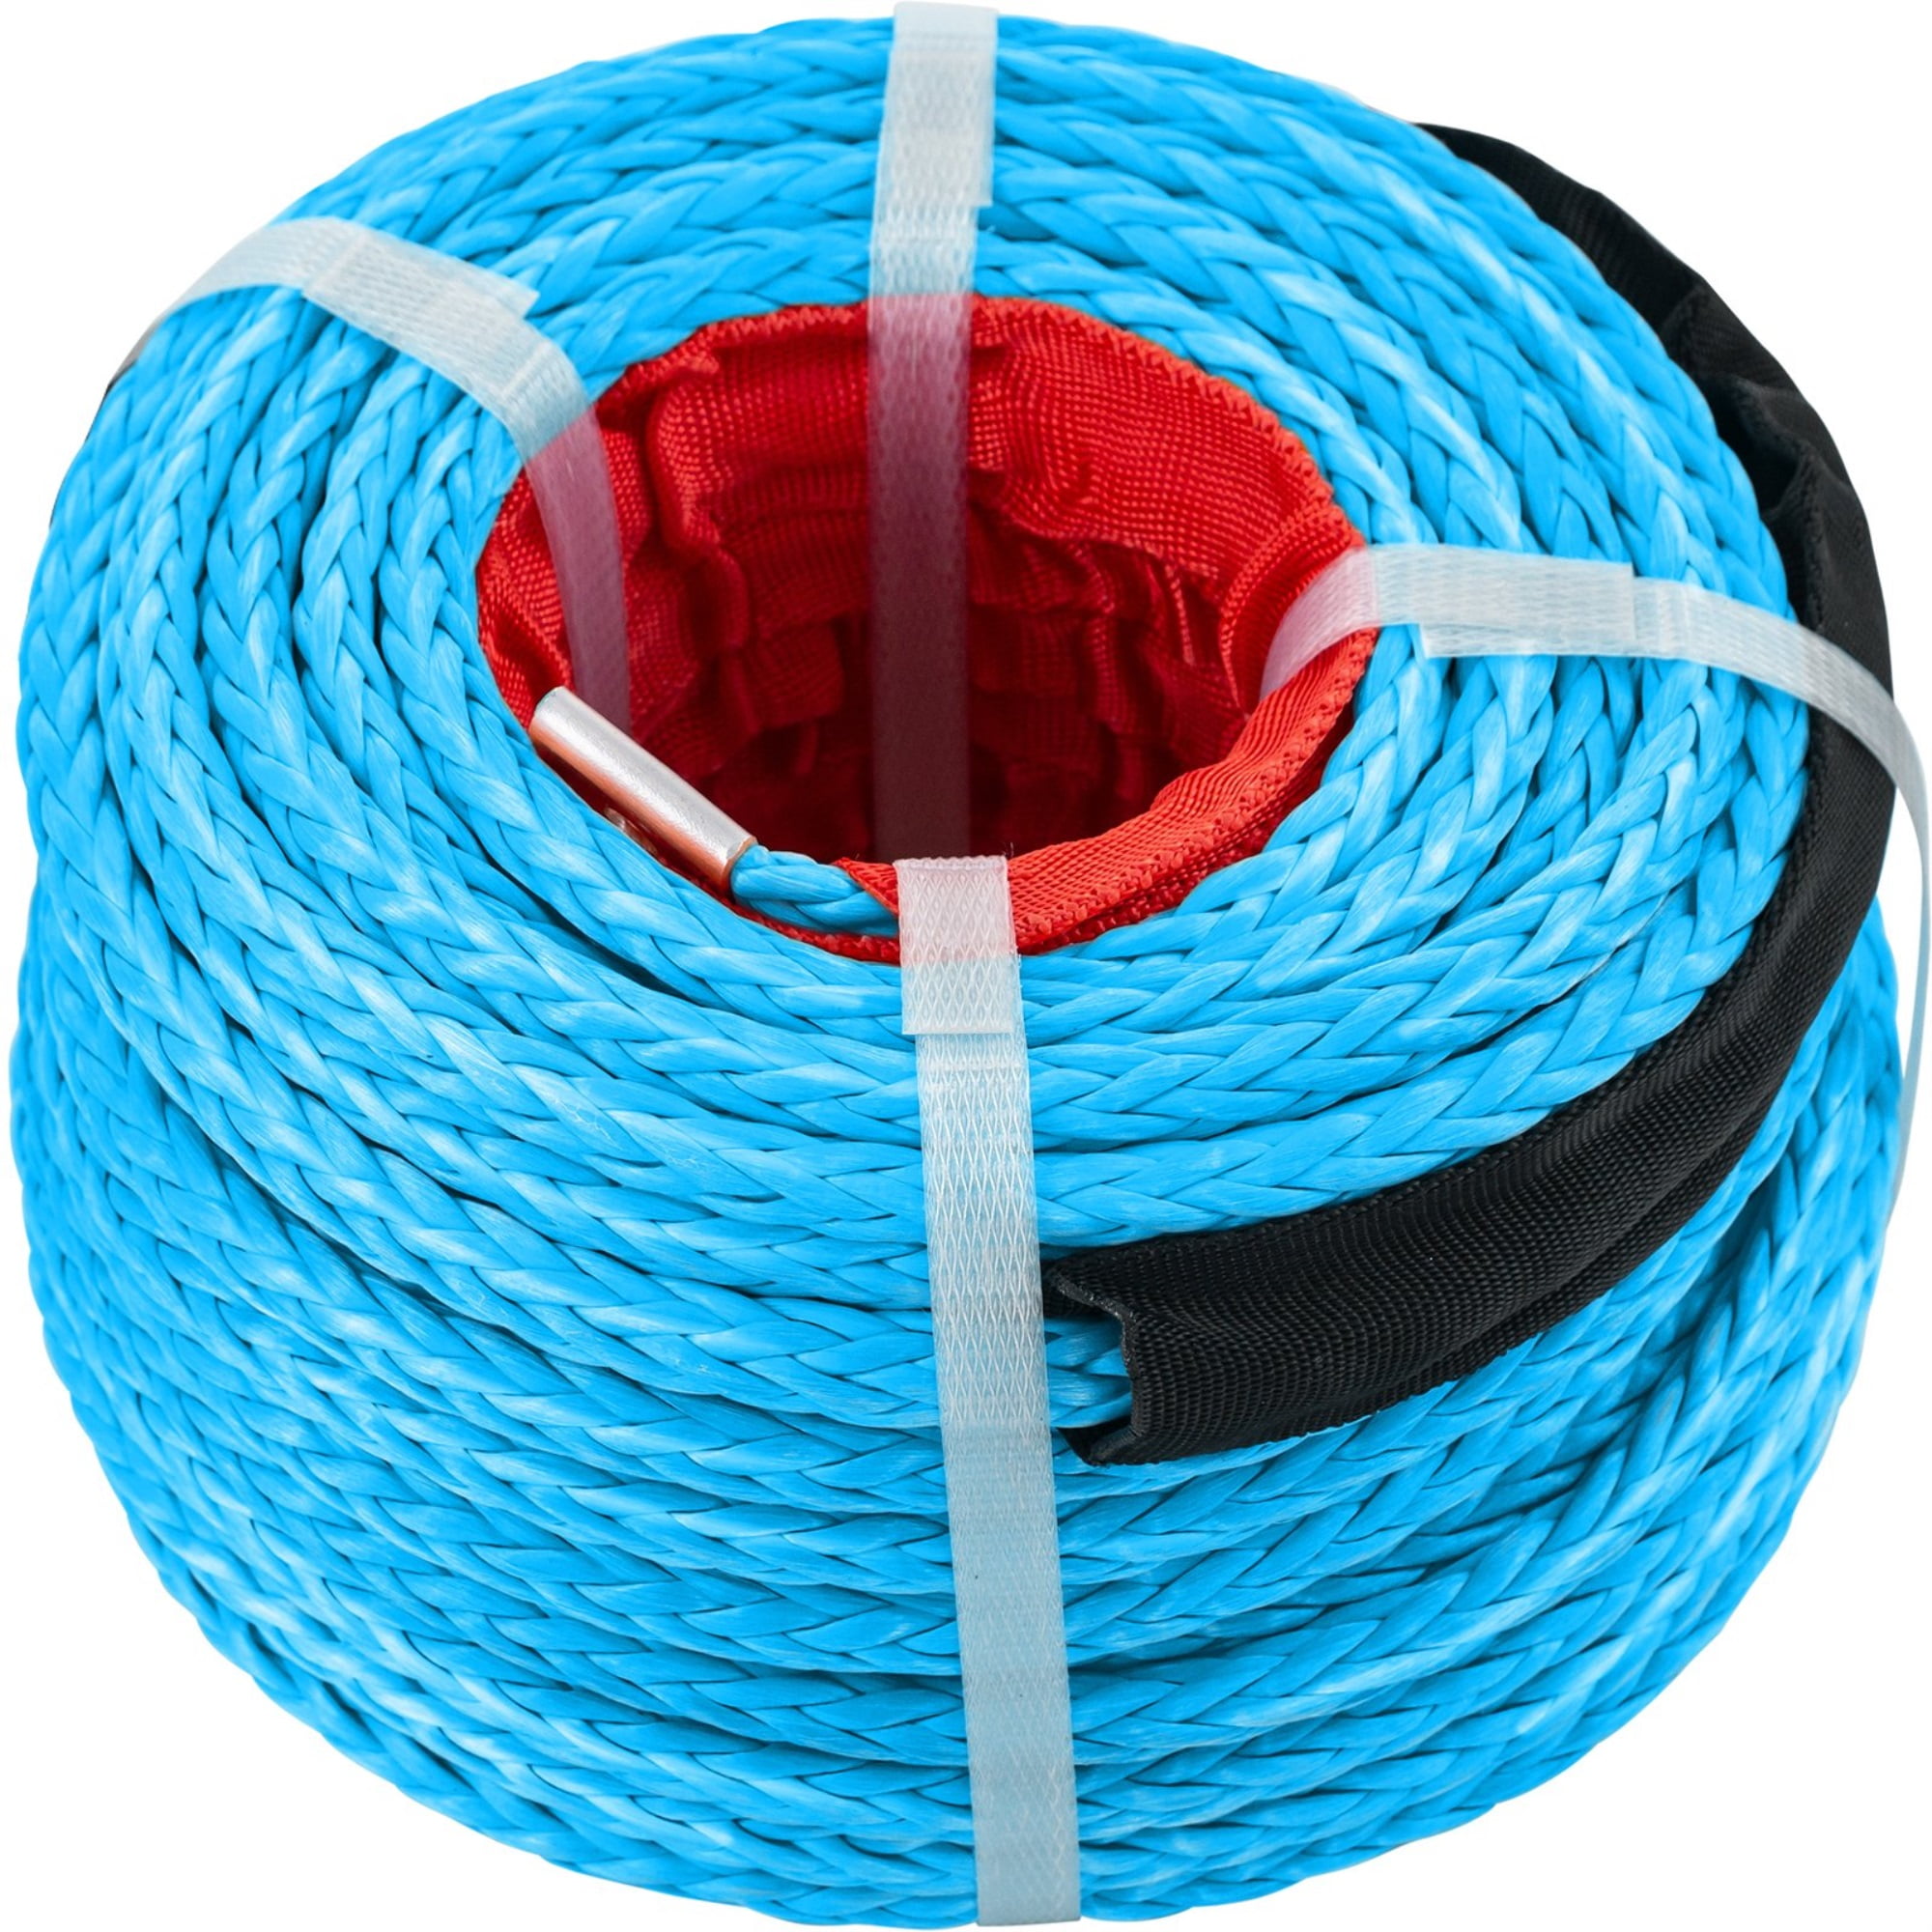 Blue 3/8inch*100feet synthetic winch rope,Replacement Winch Cable,Towing Ropes